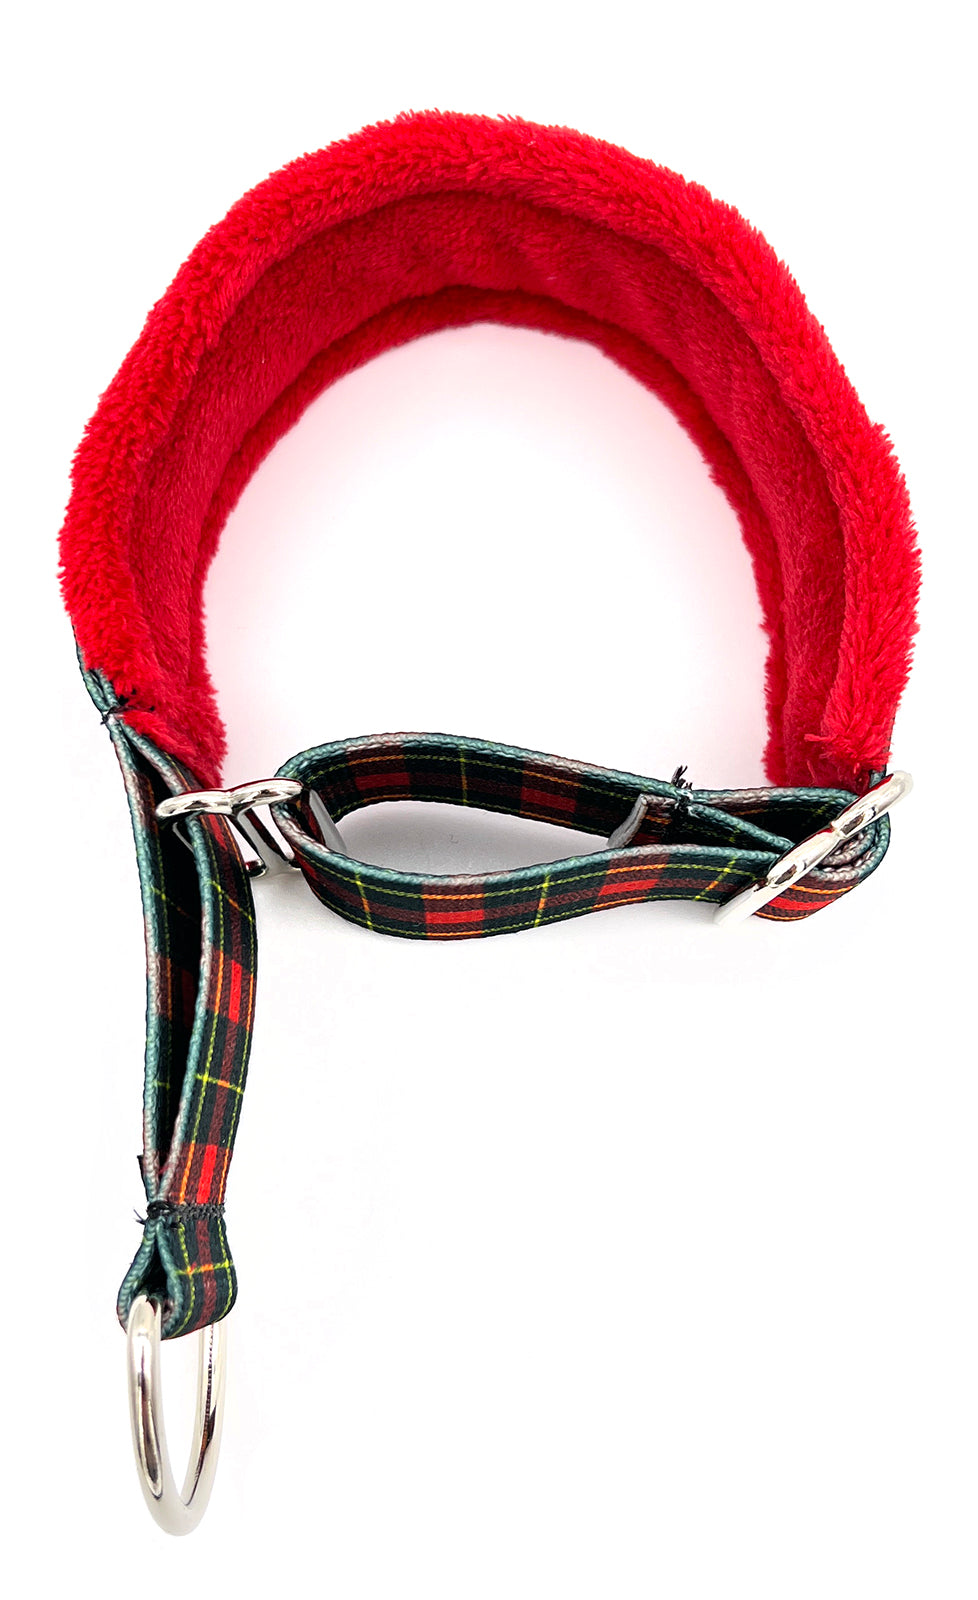 1.5" Red Plaid Everyday Limited Slip Collar